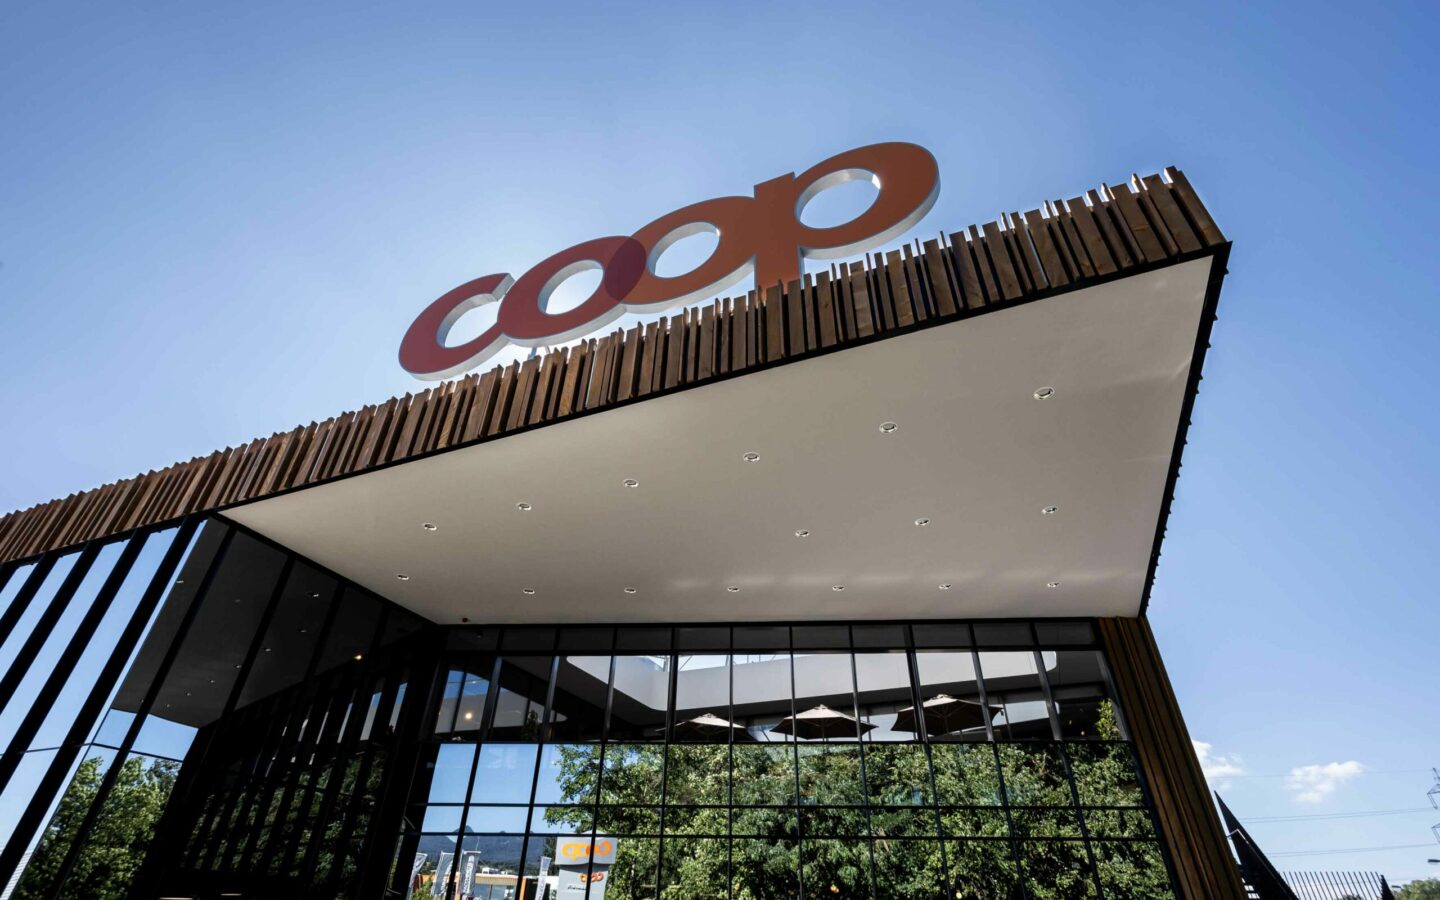 Image with the exterior view of a Coop supermarket, SAP Commerce